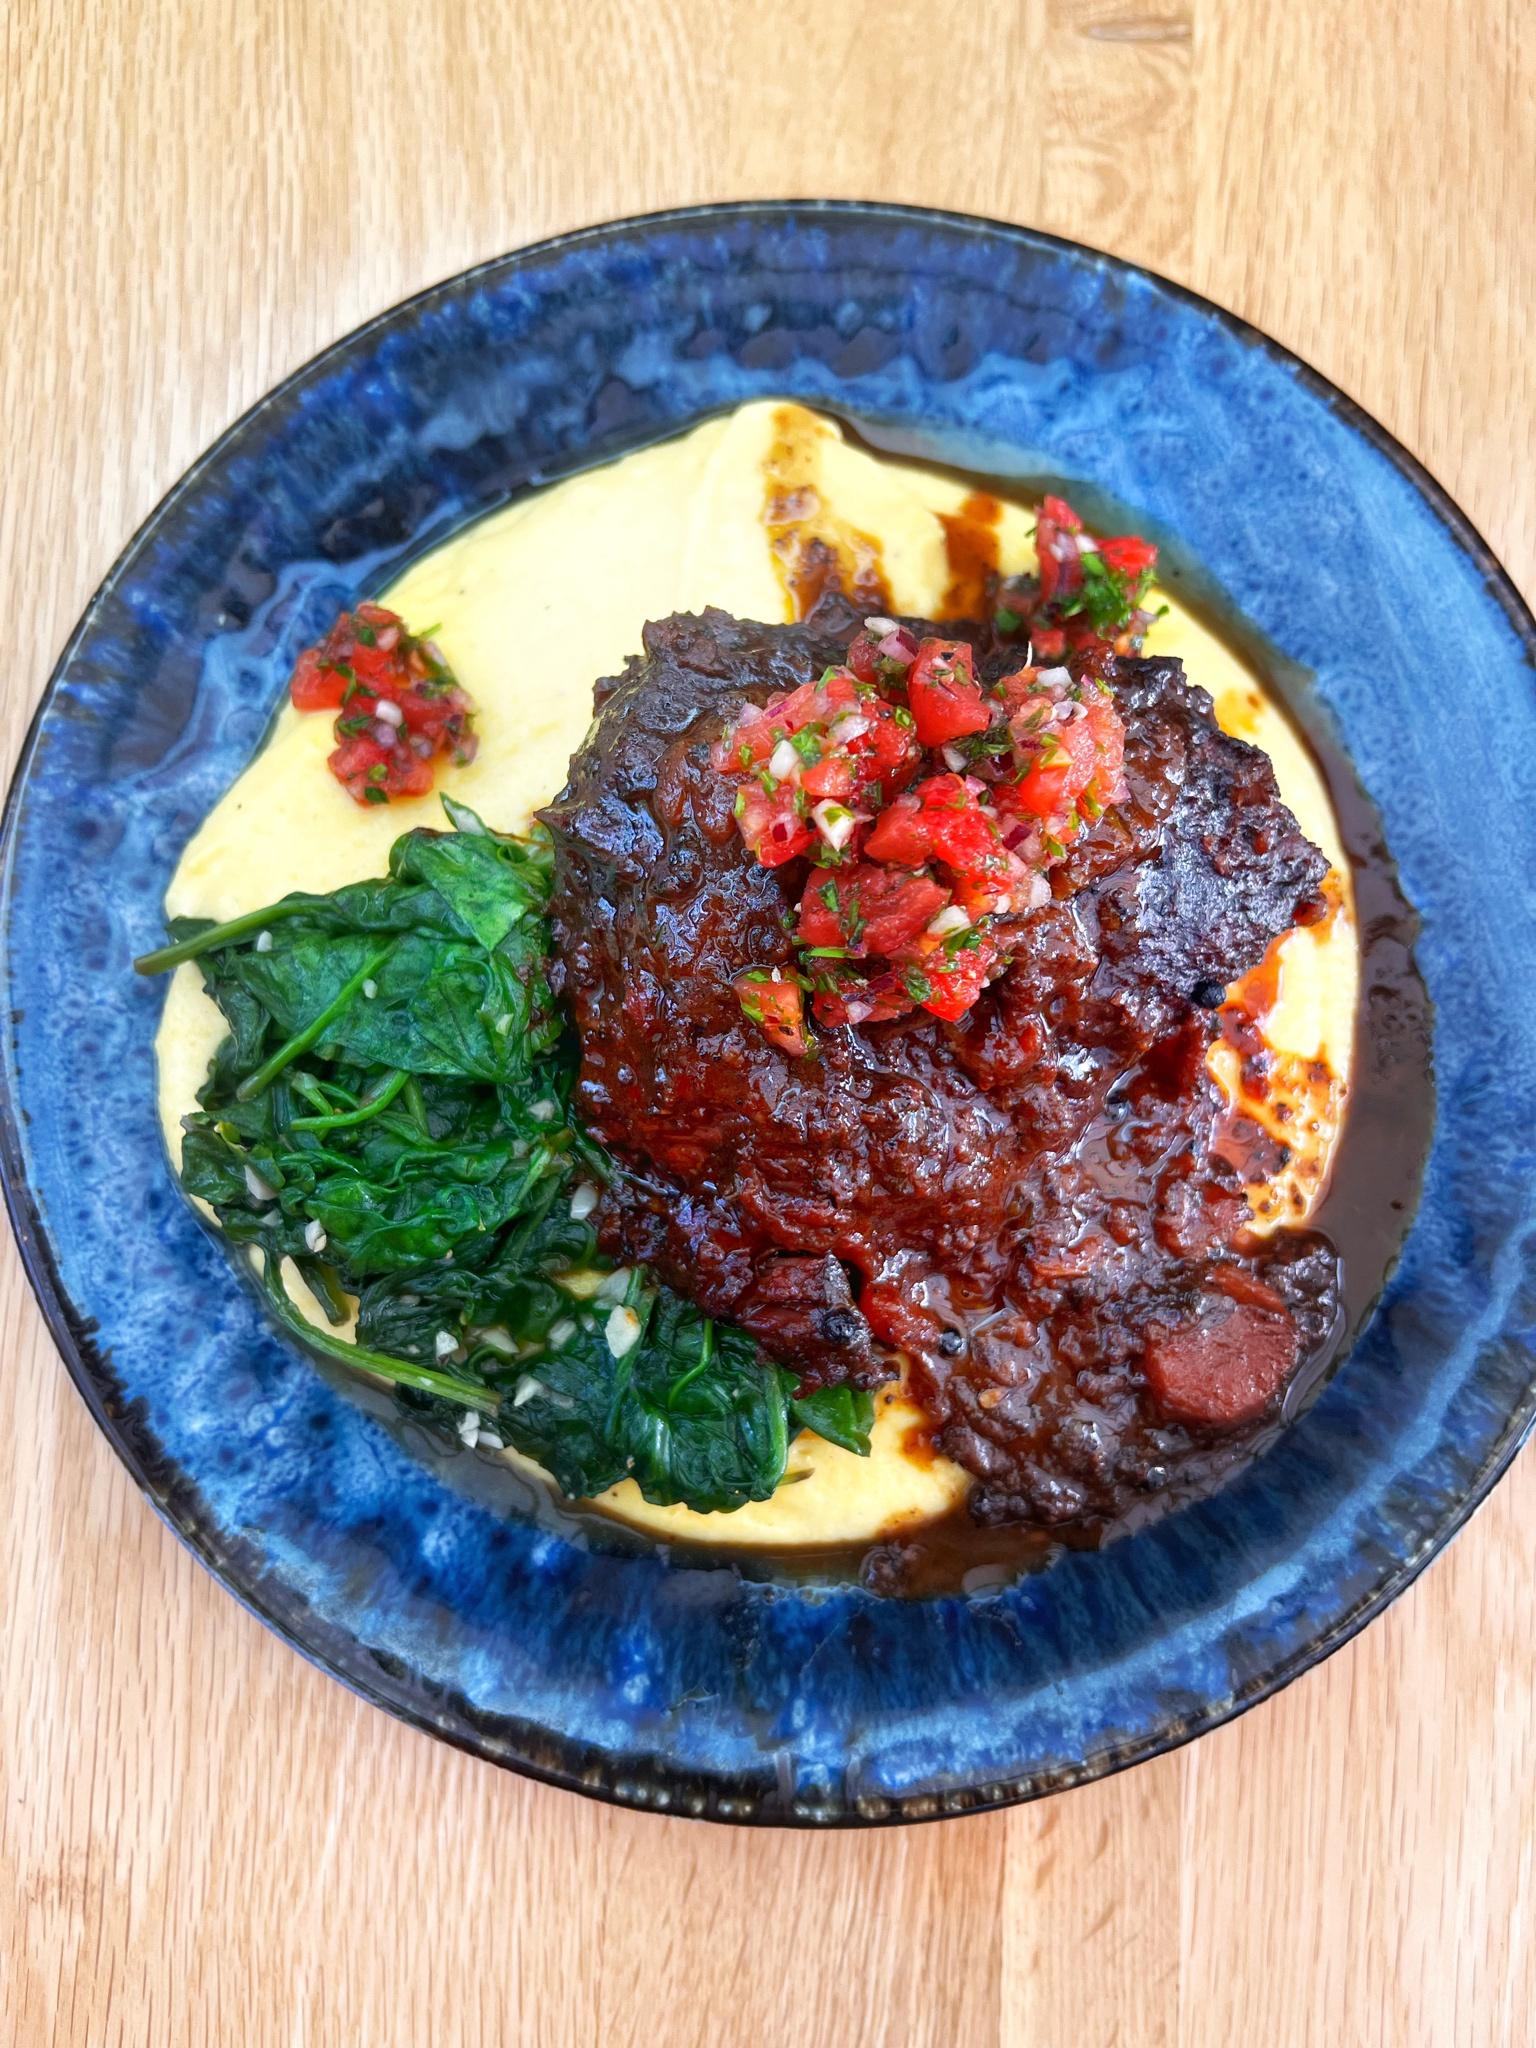 Braised Oxcheek in pink wine on cheddar cheese polenta with garlic spinach and a rough chopped salsa for freshness